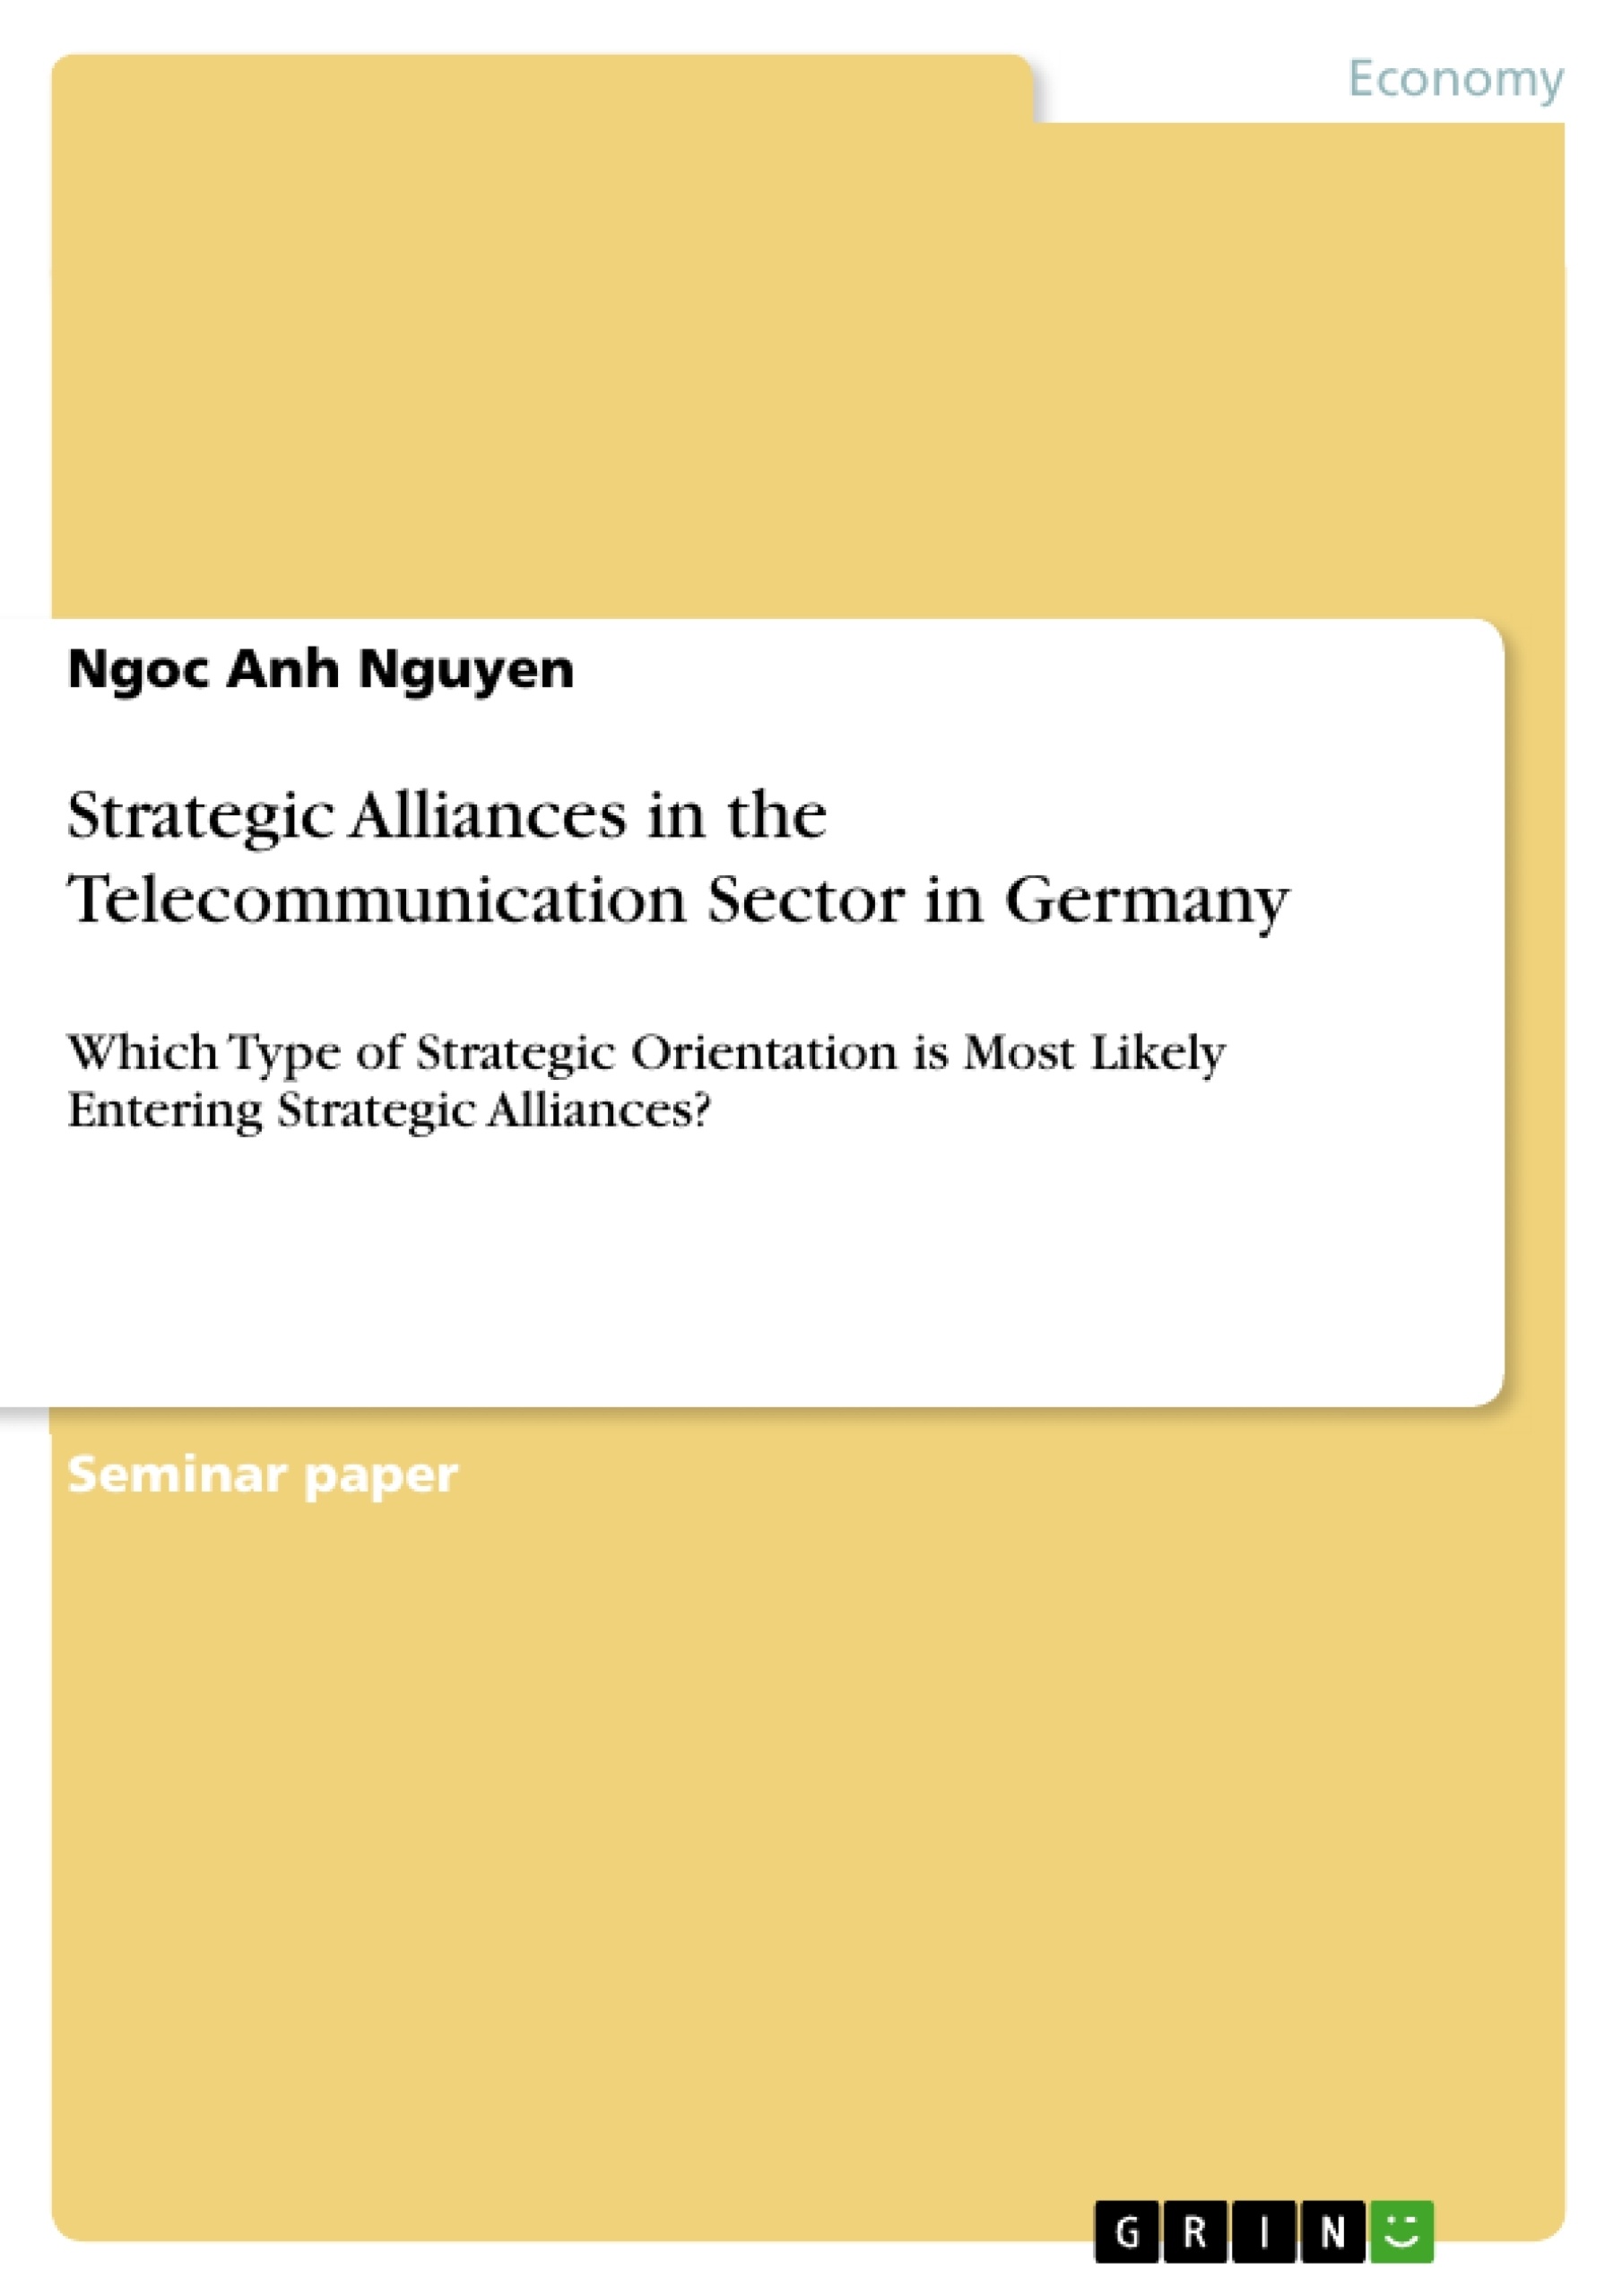 Título: Strategic Alliances in the Telecommunication Sector in Germany